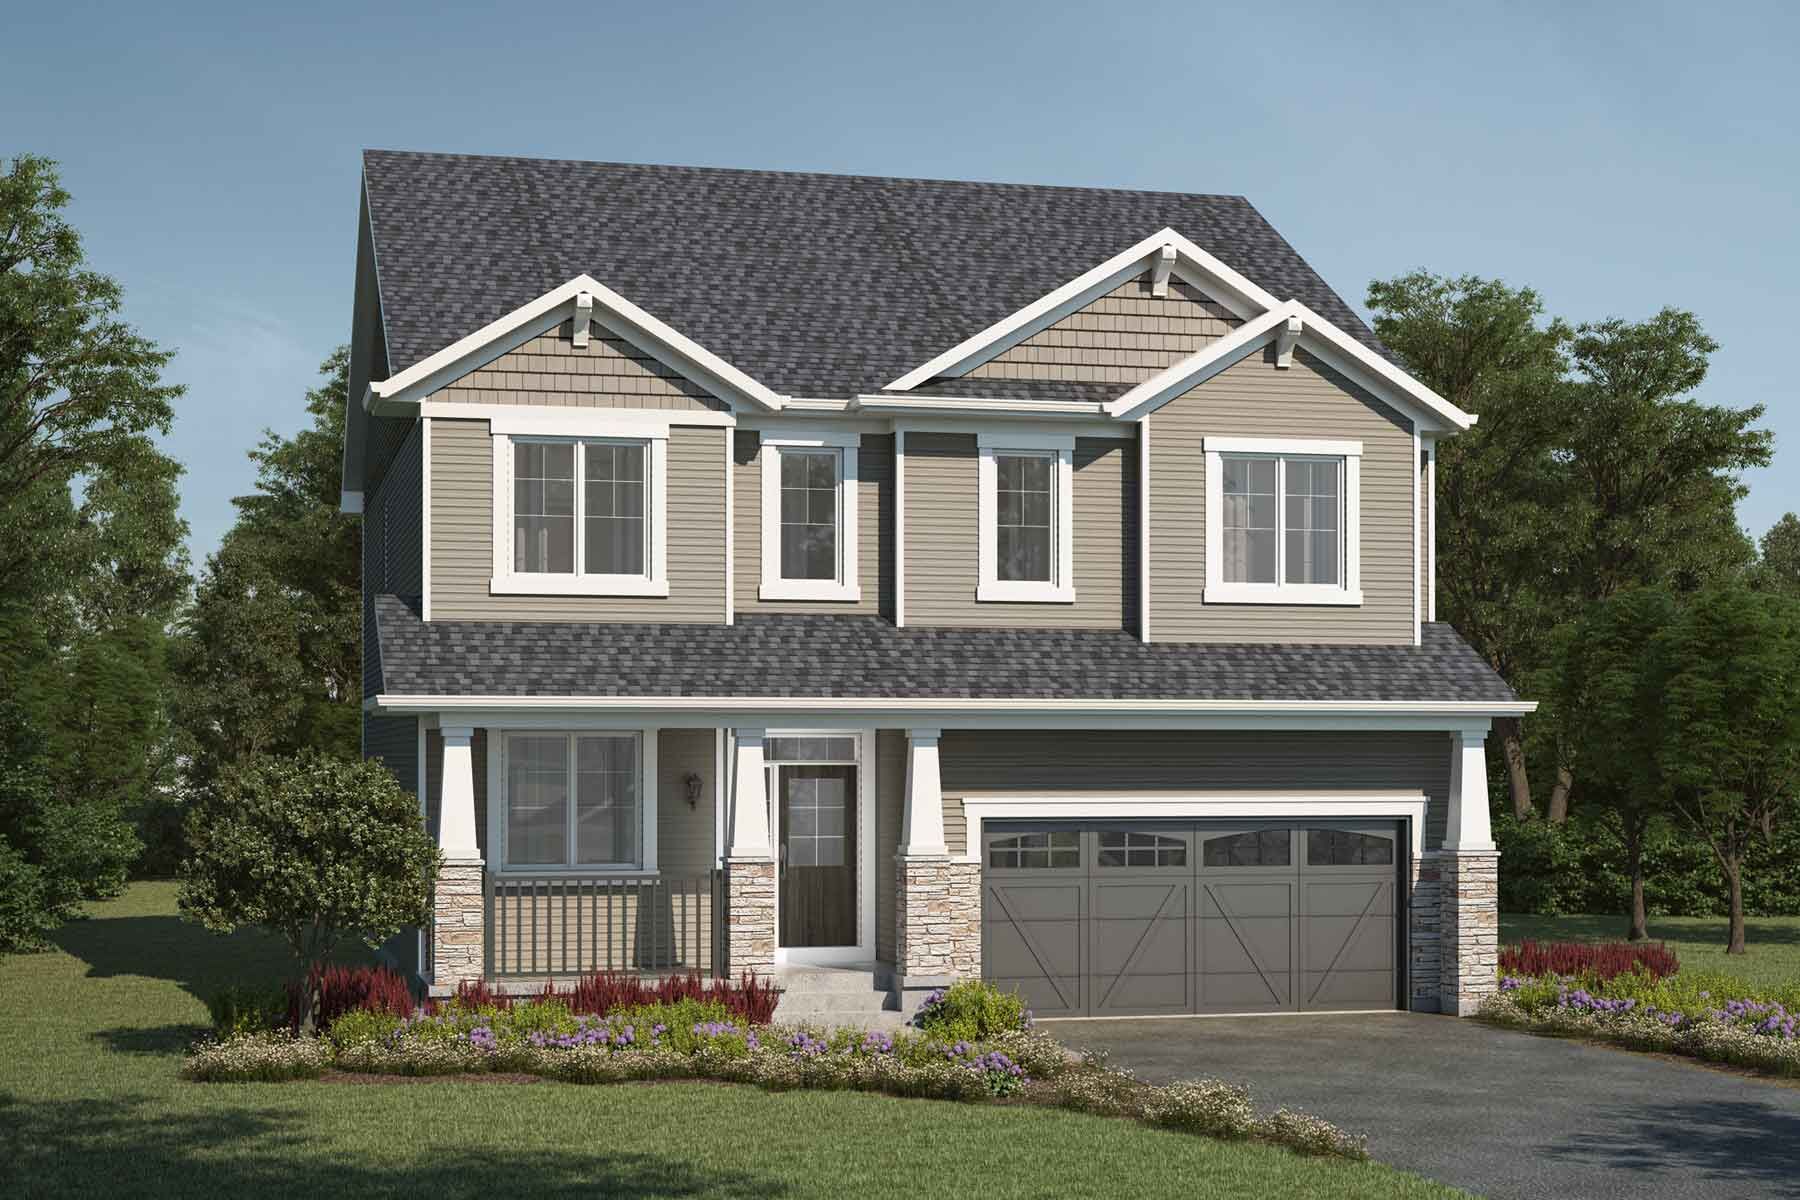 A detached Craftsman style home with a double car garage.